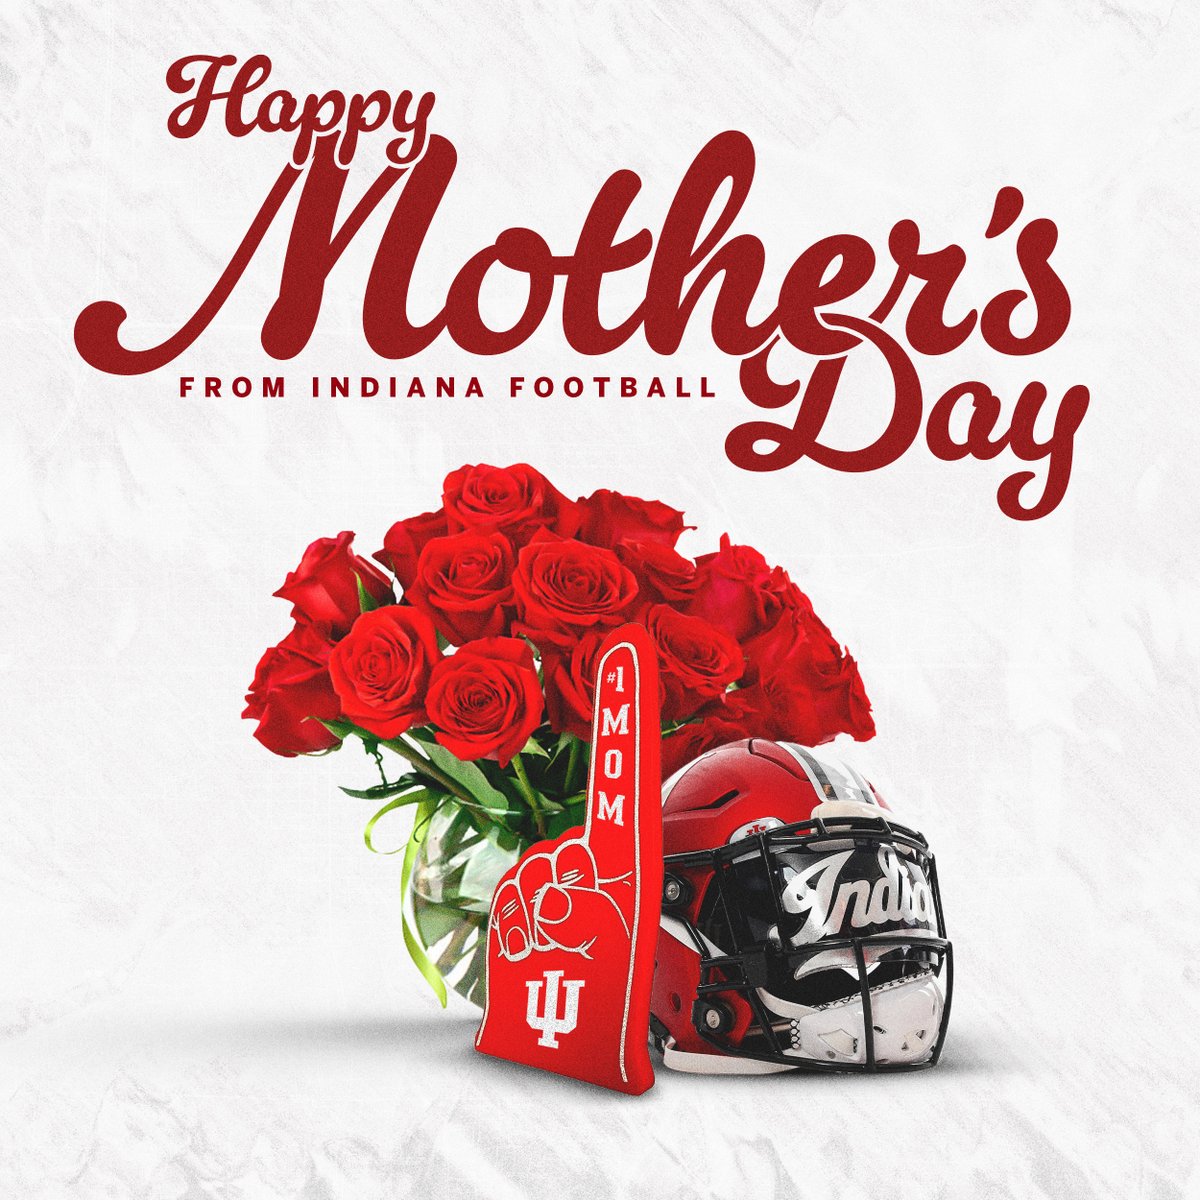 Happy Mother's Day from #IUFB!